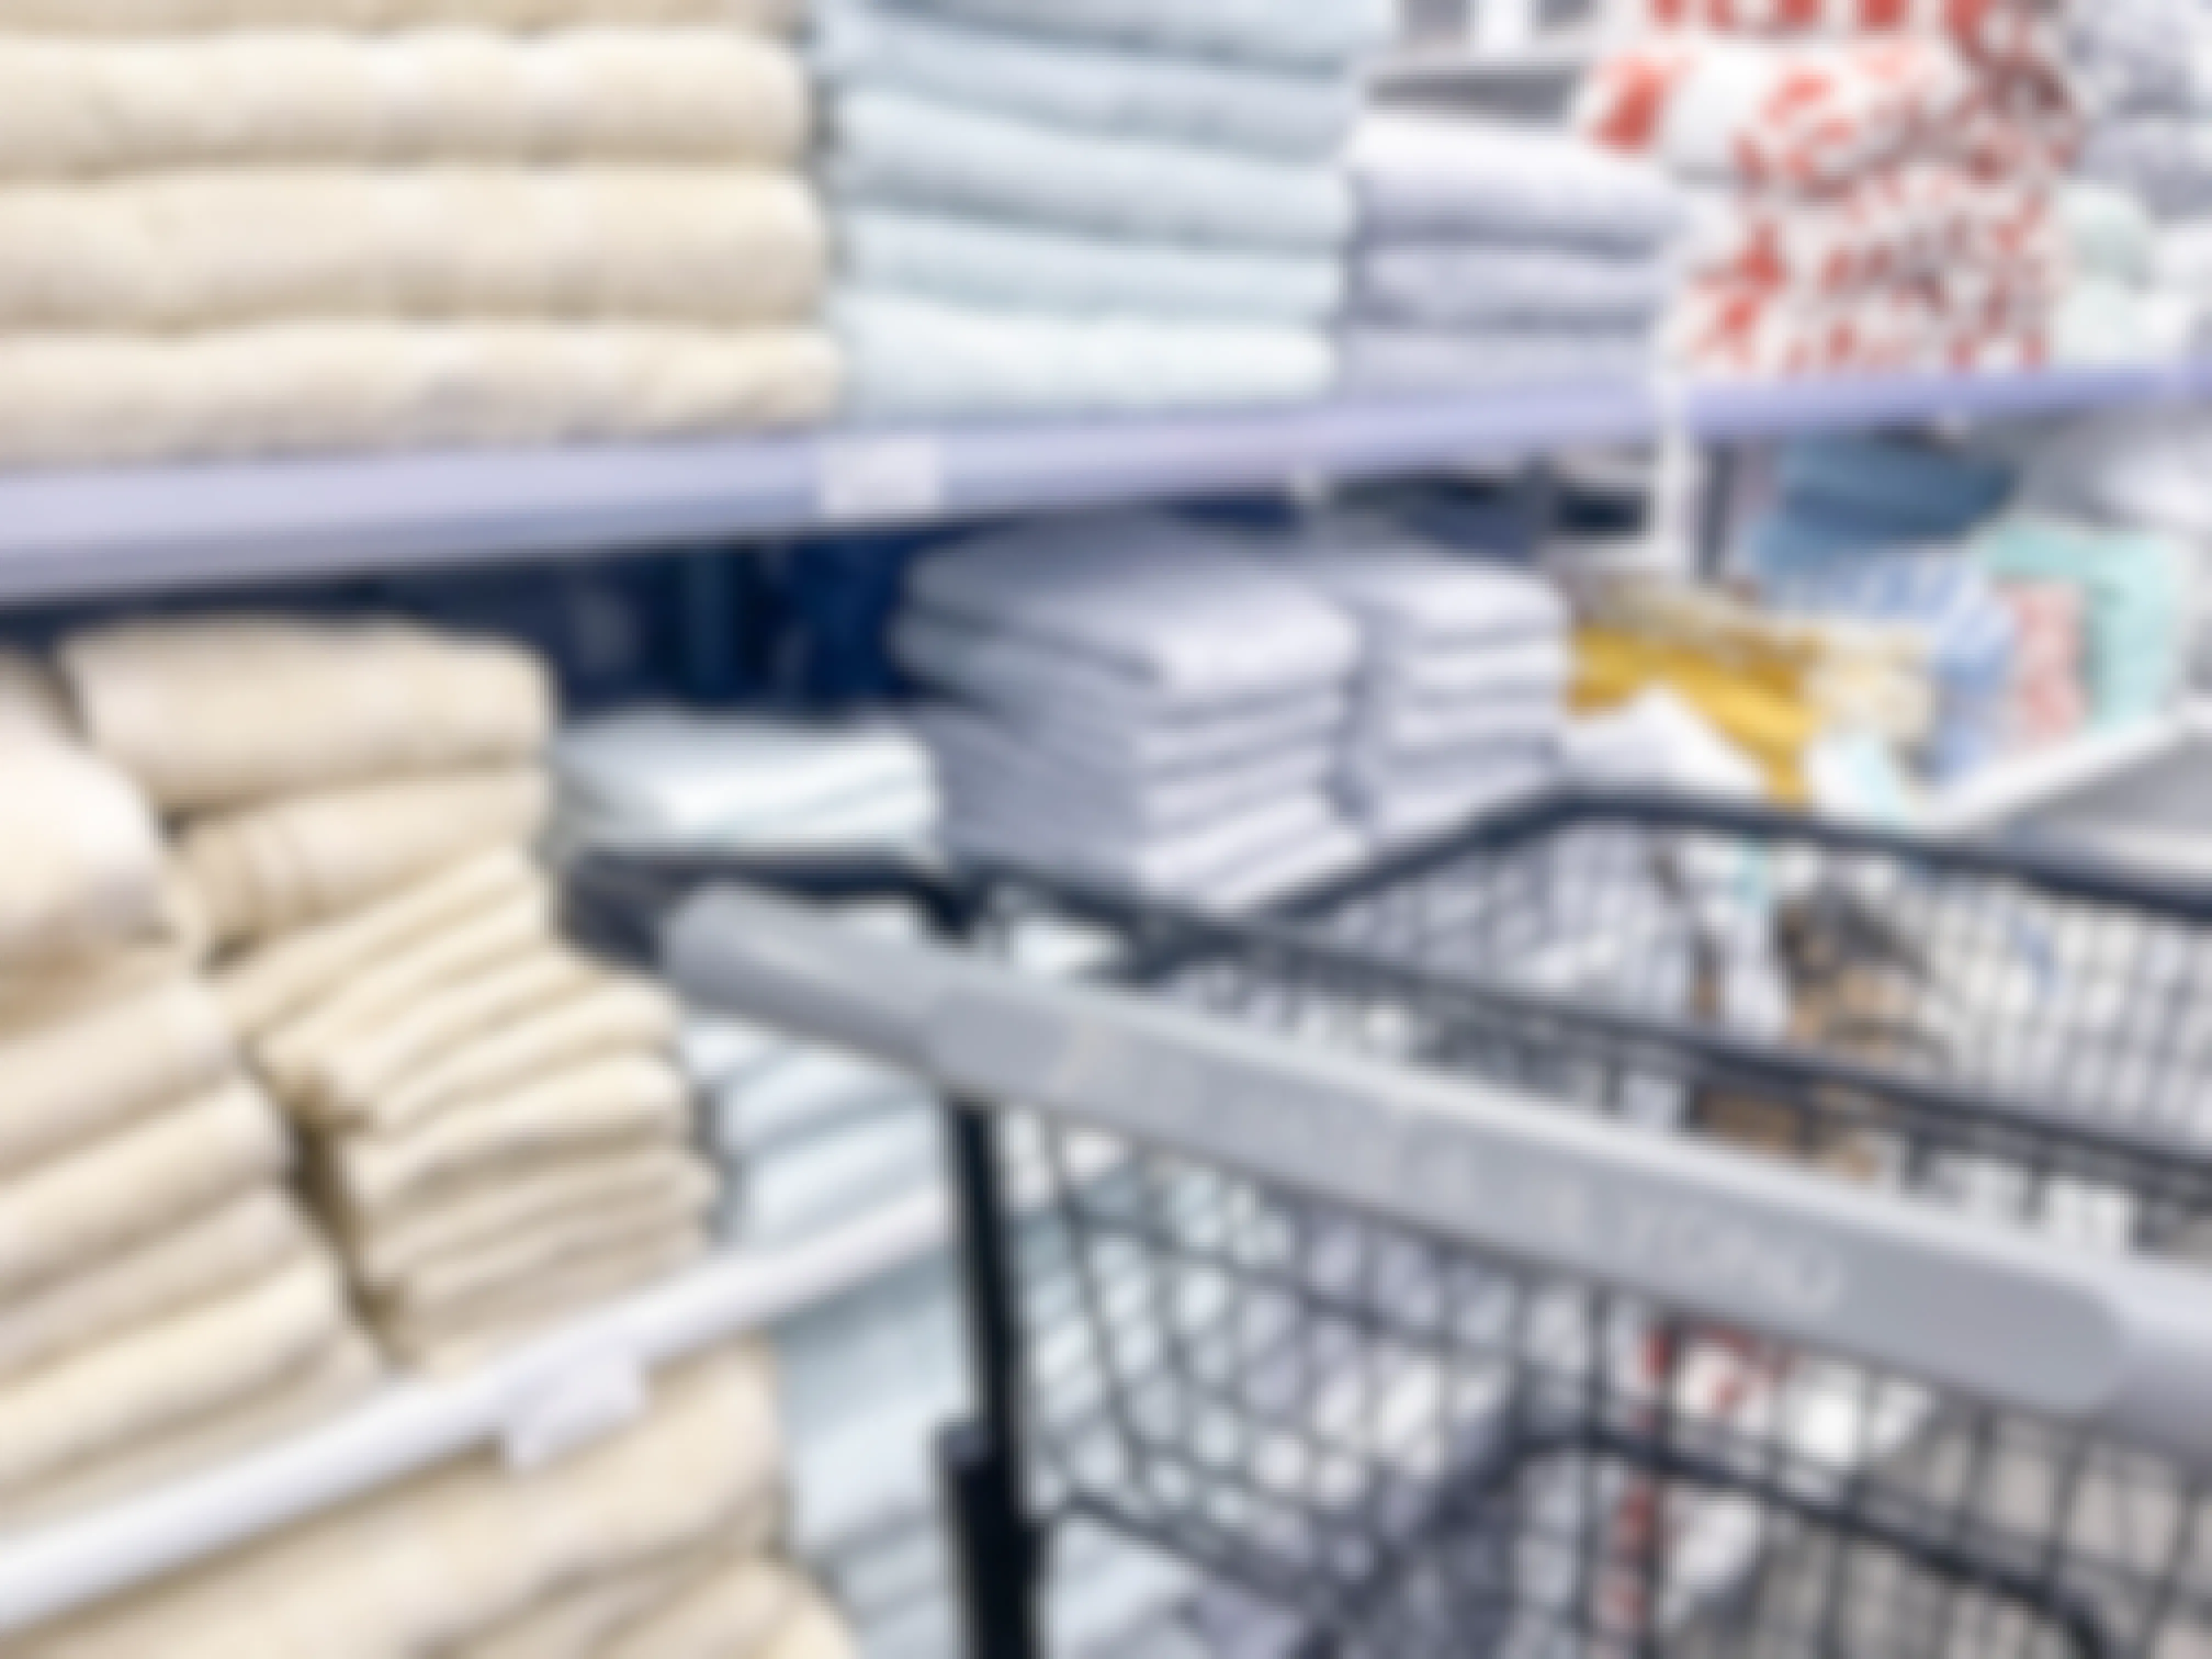 bed bath and beyond towels near cart in store